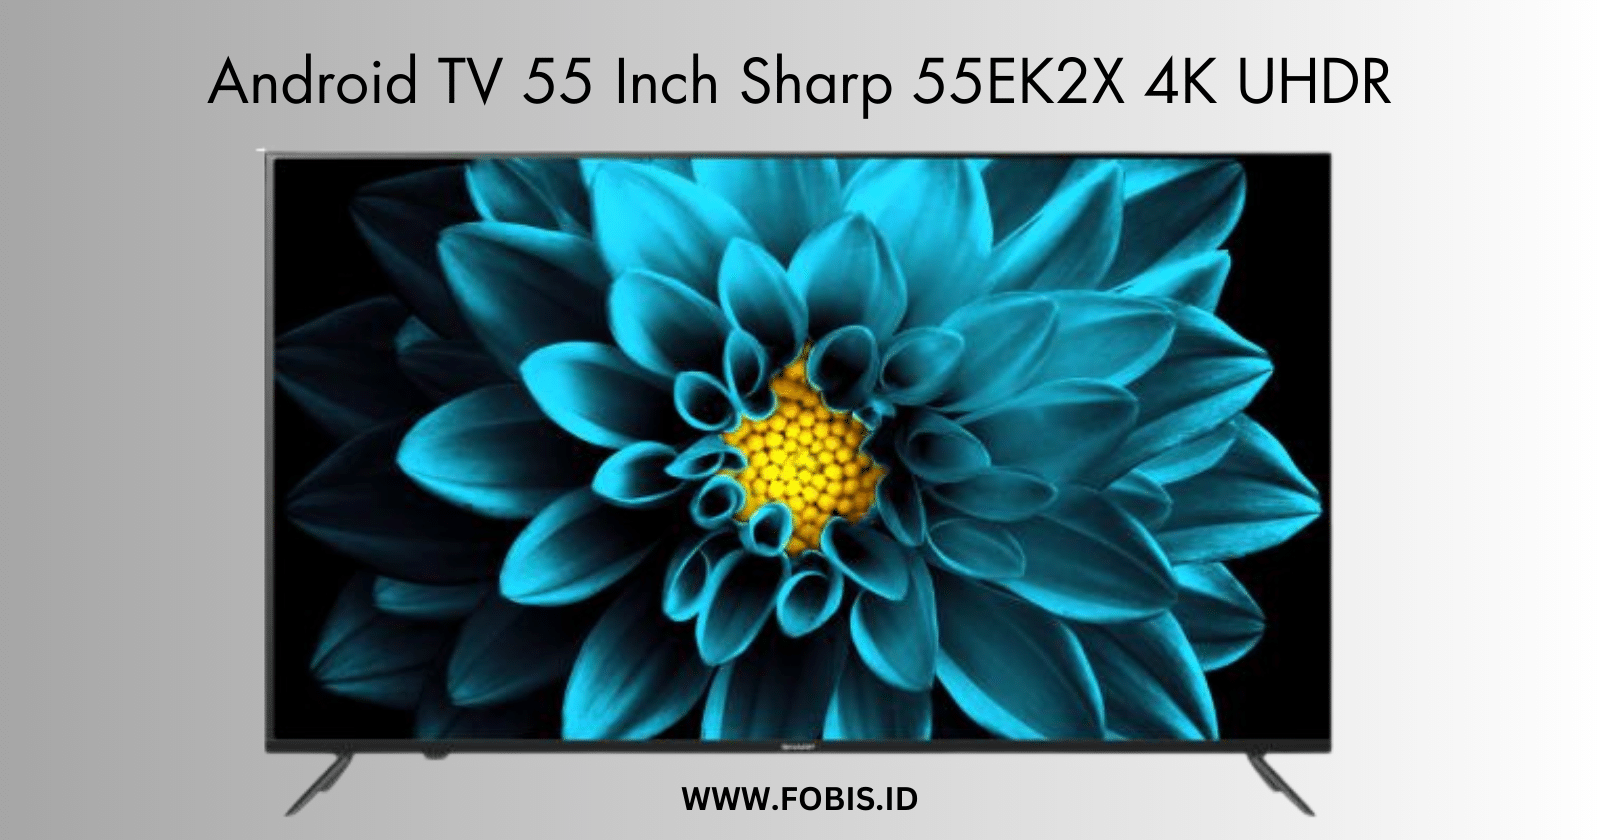 Android TV 55 inch Sharp